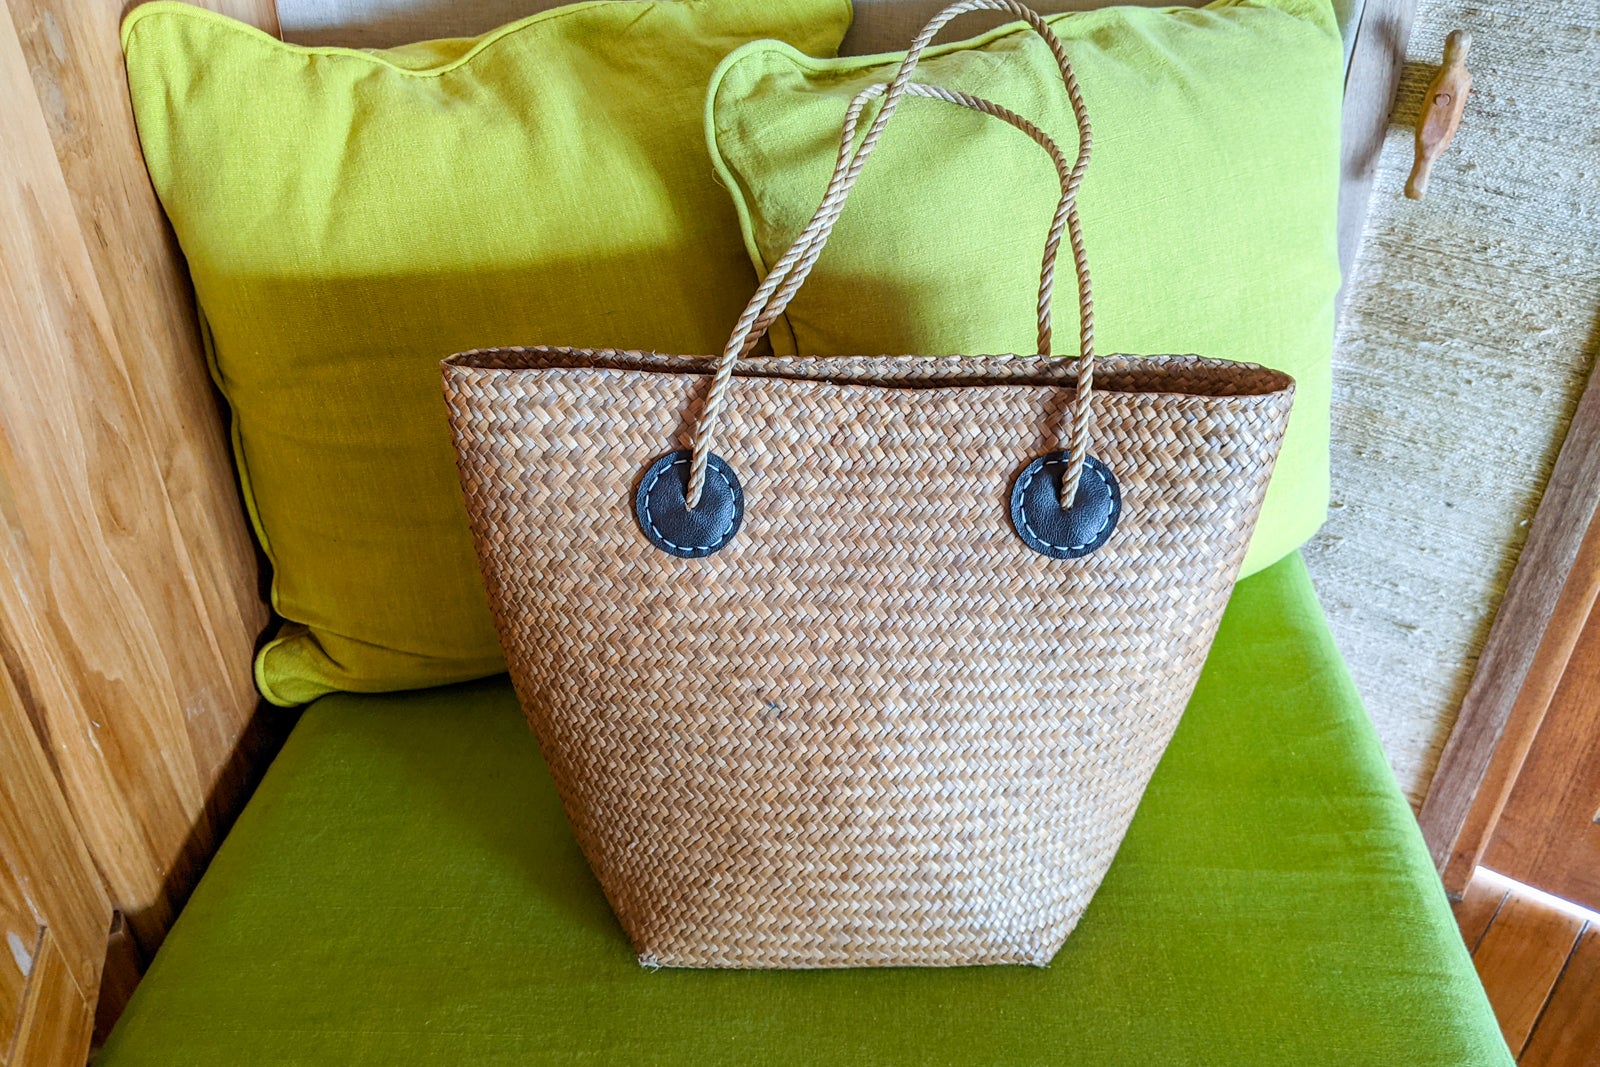 Beach bag from one of the closets